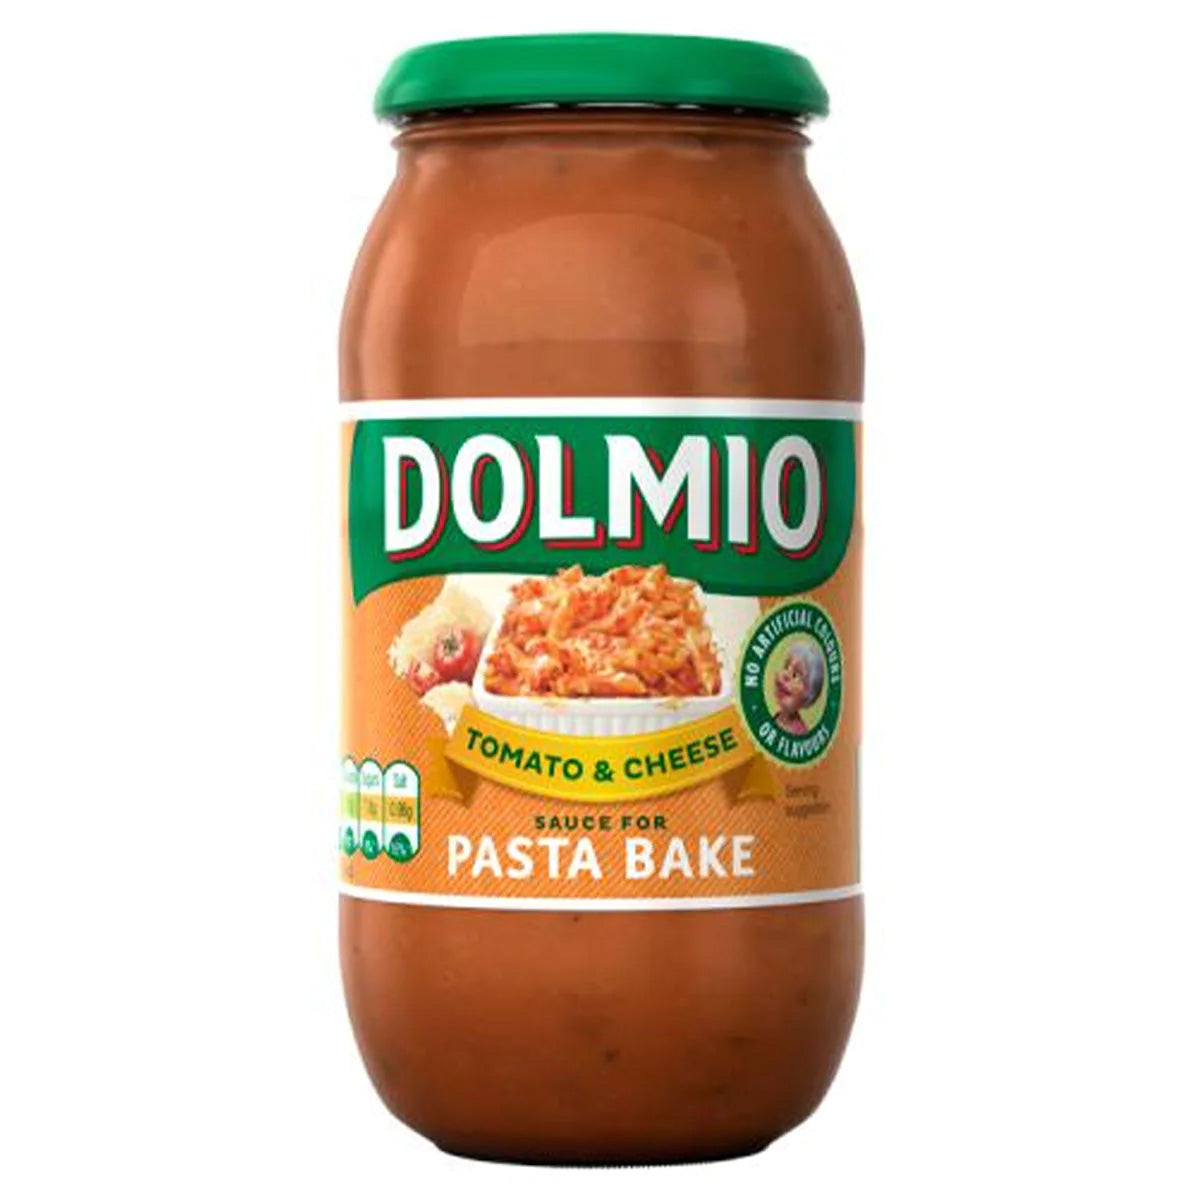 Dolmio - Pasta Bake Tomato and Cheese Pasta Sauce - 500g - Continental Food Store